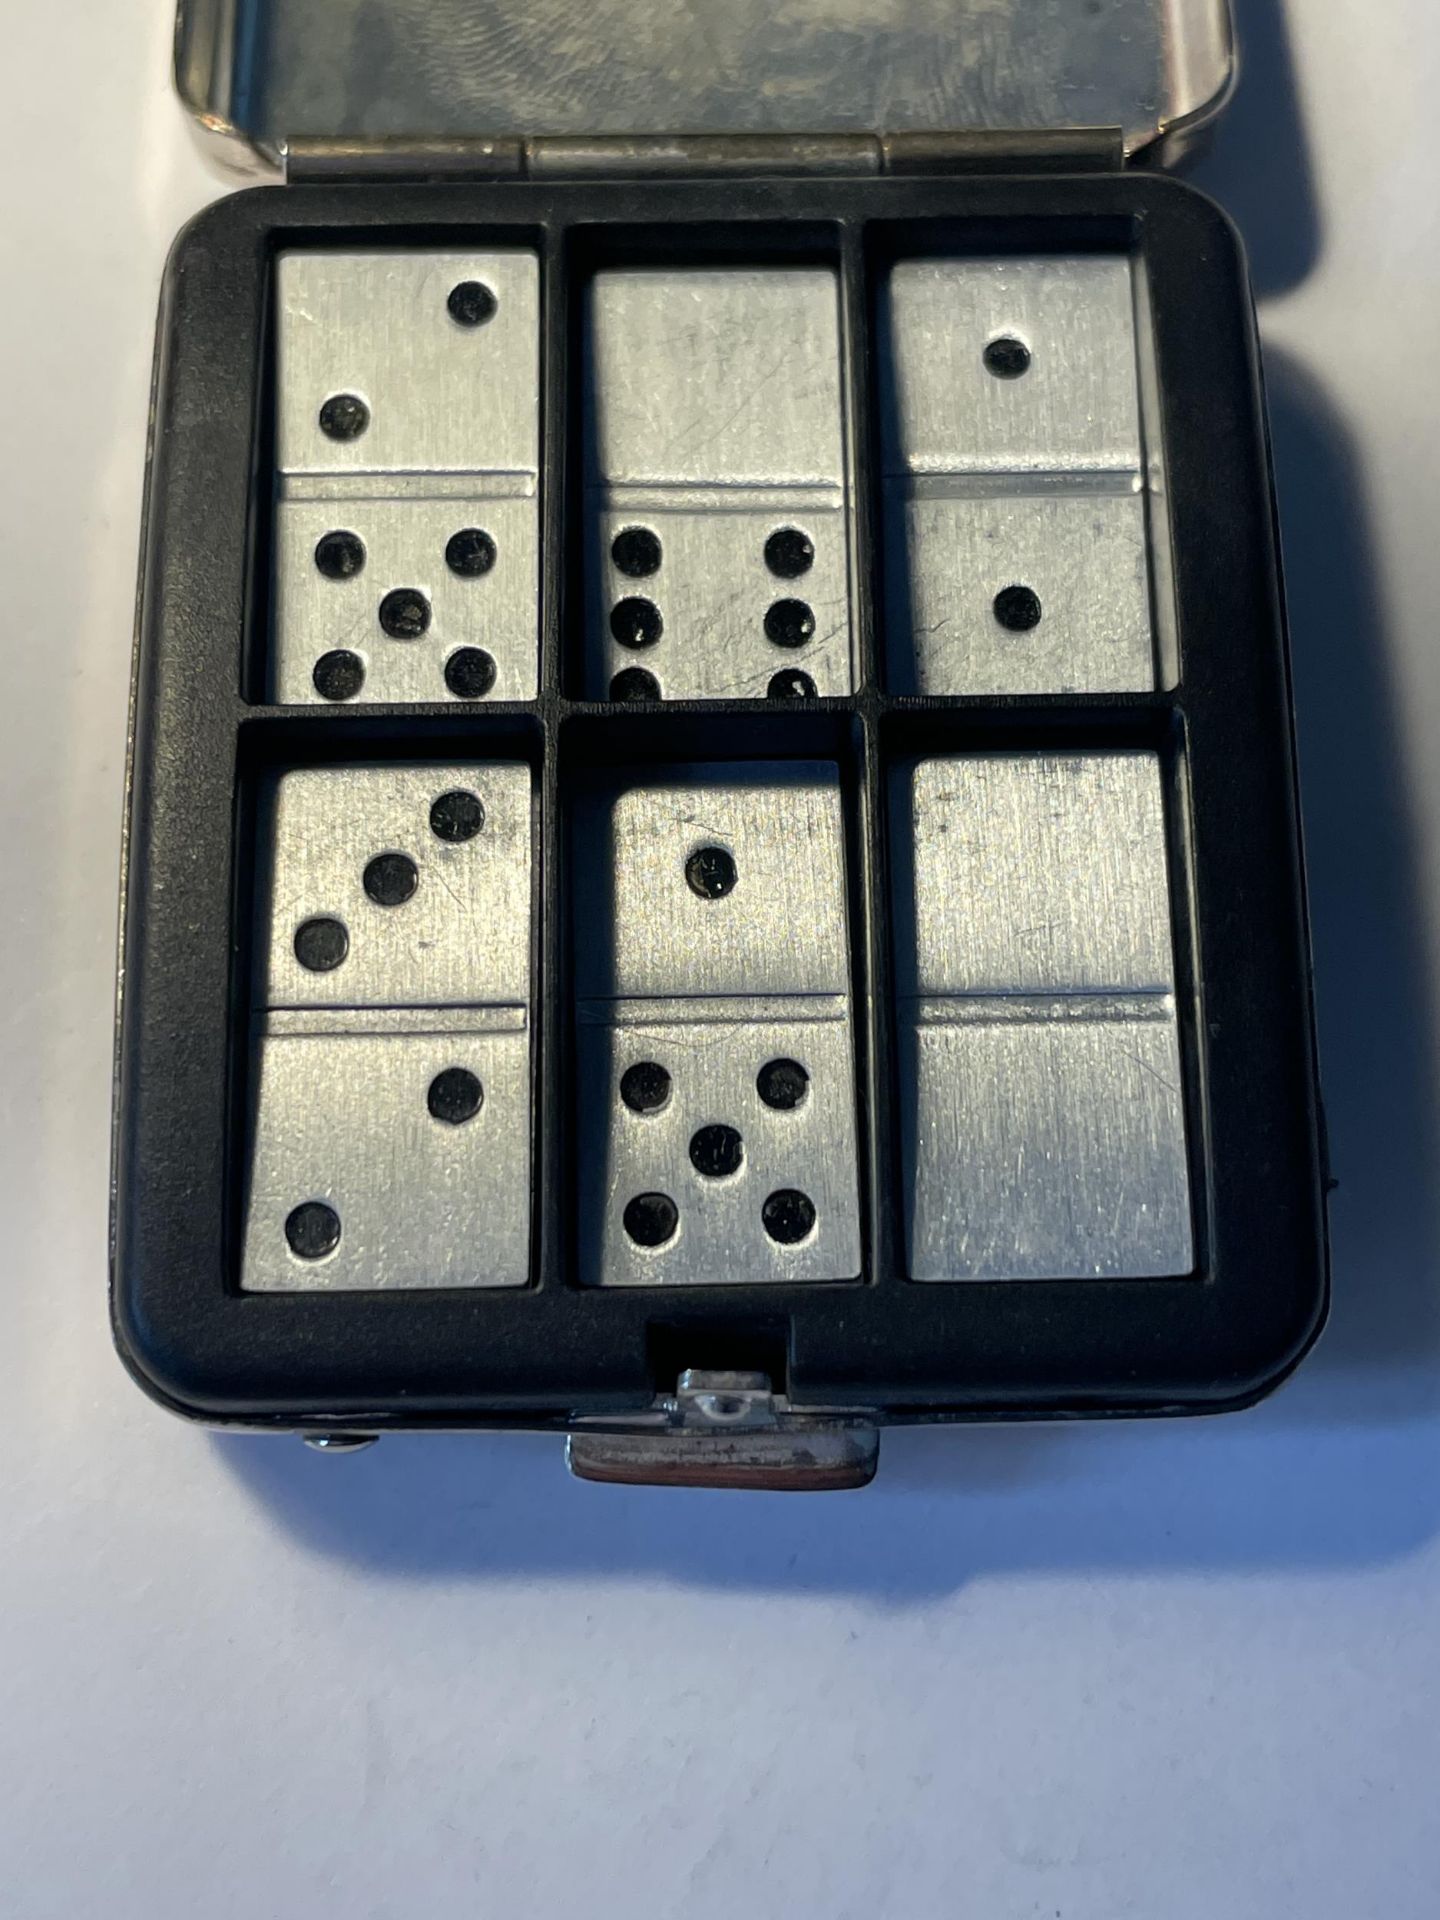 A VINTAGE BURBERRY MINIATURE POCKET SIZED DOMINO SET WITH TWENTY SEVEN DOMINOES - Image 4 of 4